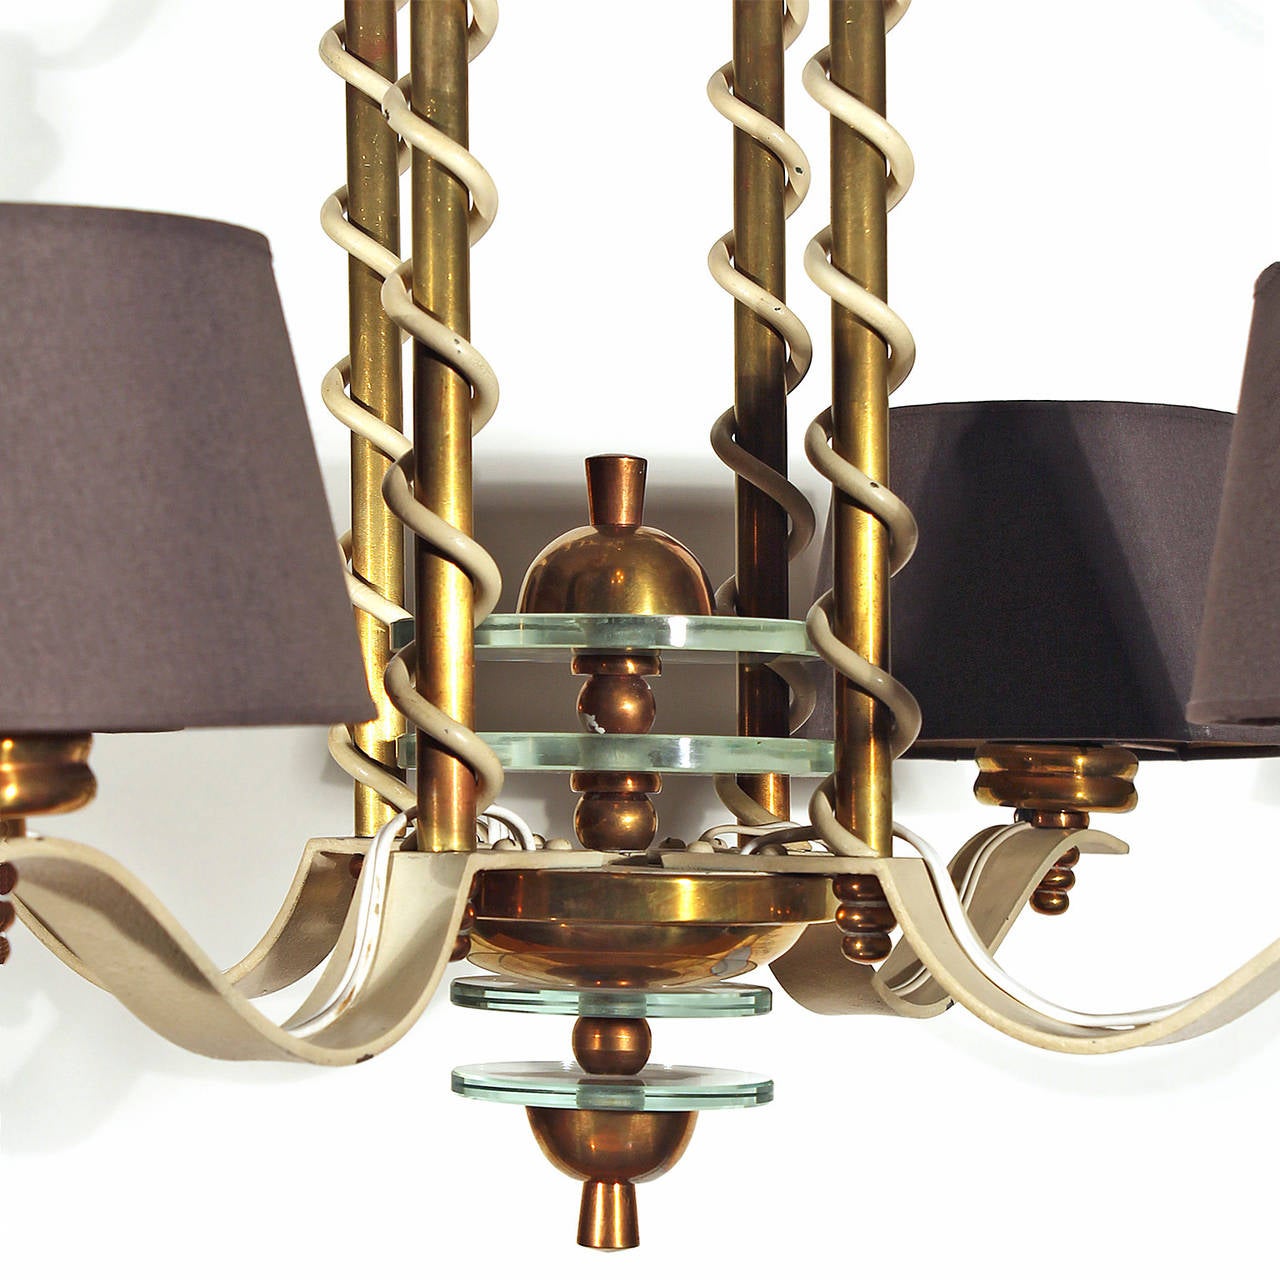 Lacquered Wrought Iron Chandelier from the 1940s